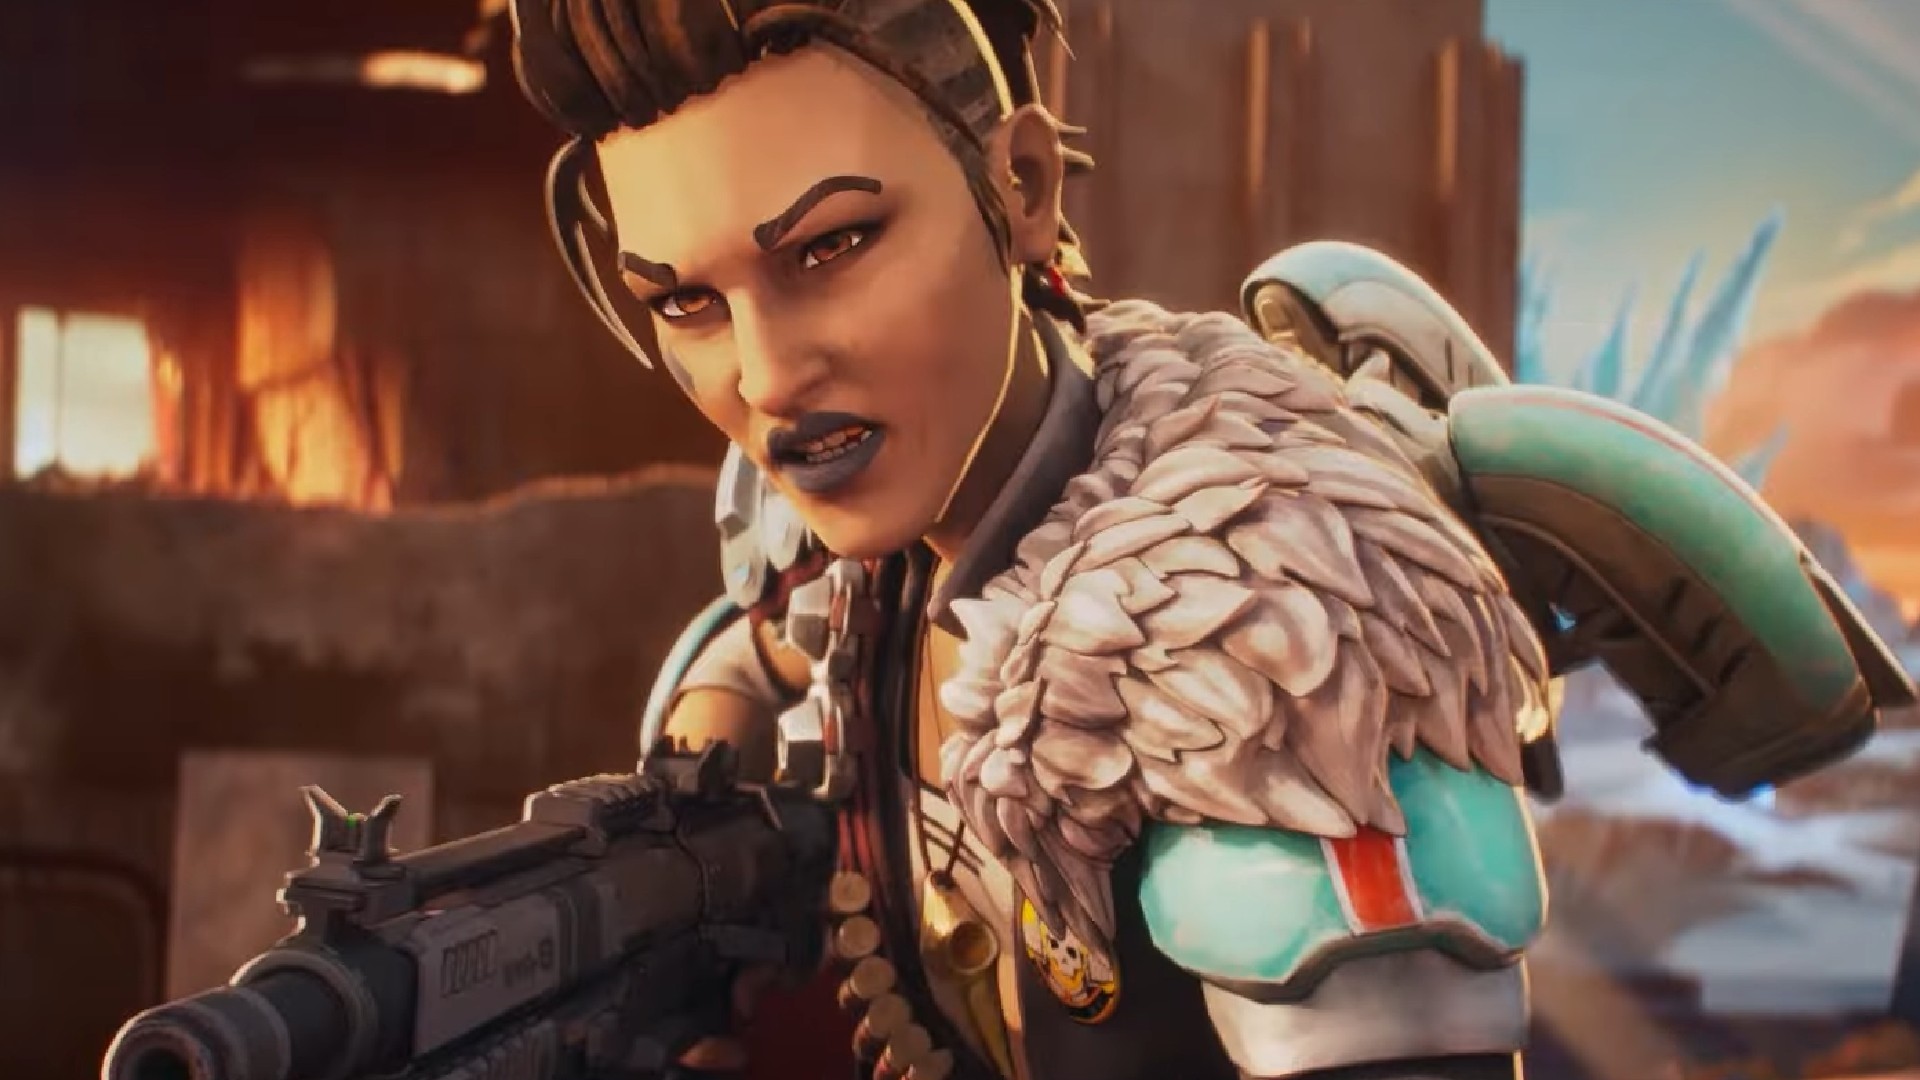 How big is Apex Legends Season 17 update? Download size for all